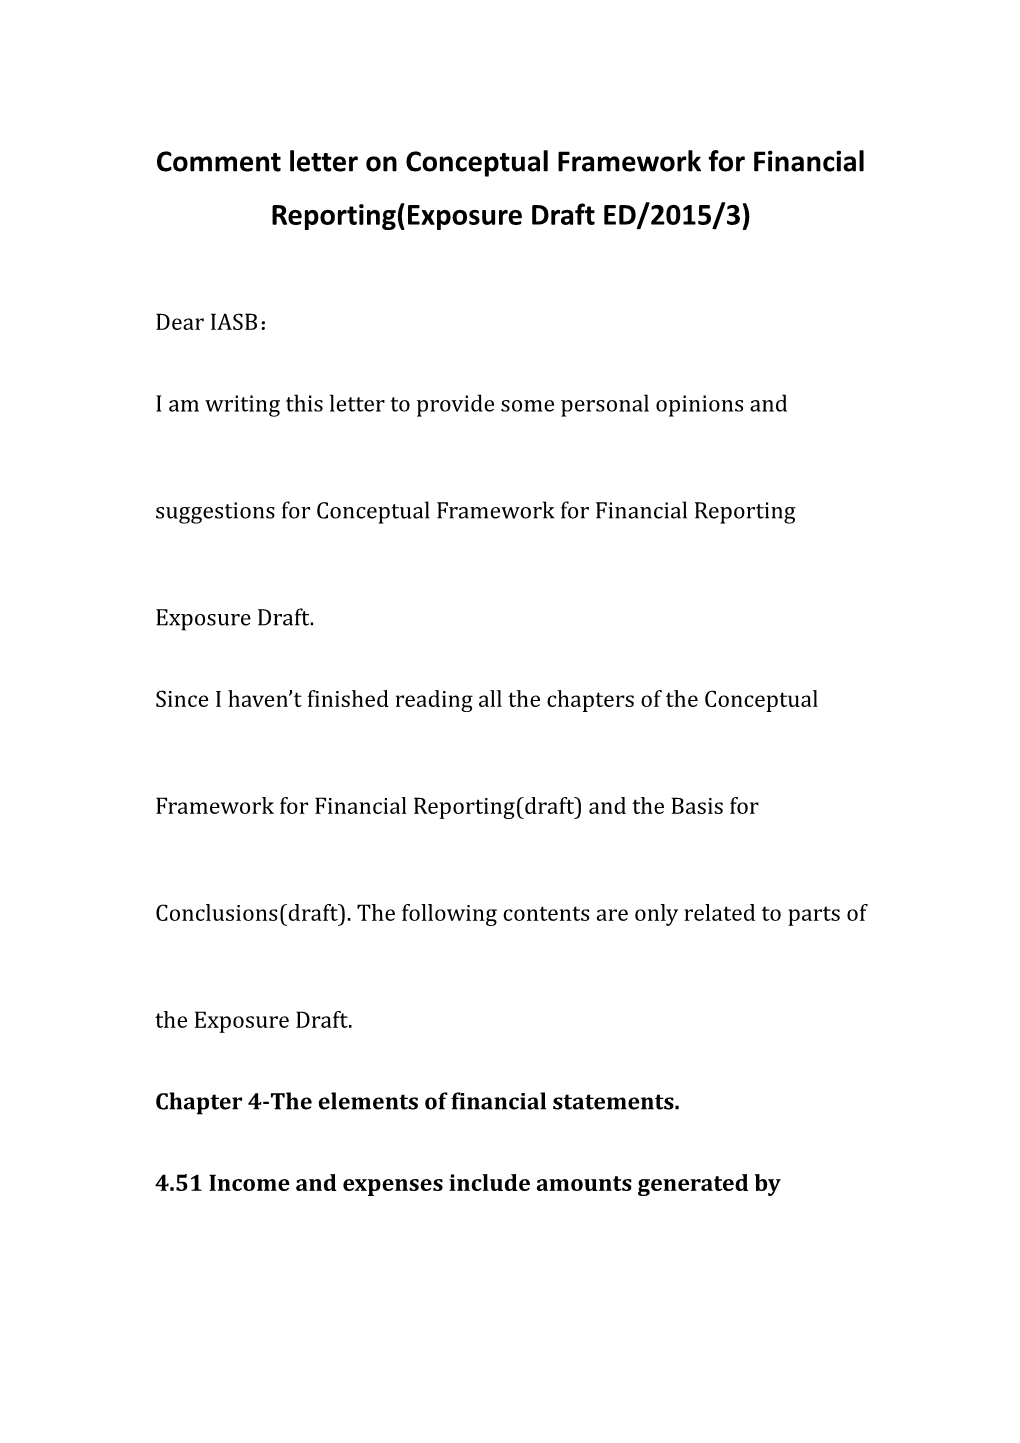 Comment Letter on Conceptual Framework for Financial Reporting(Exposure Draft ED/2015/3)